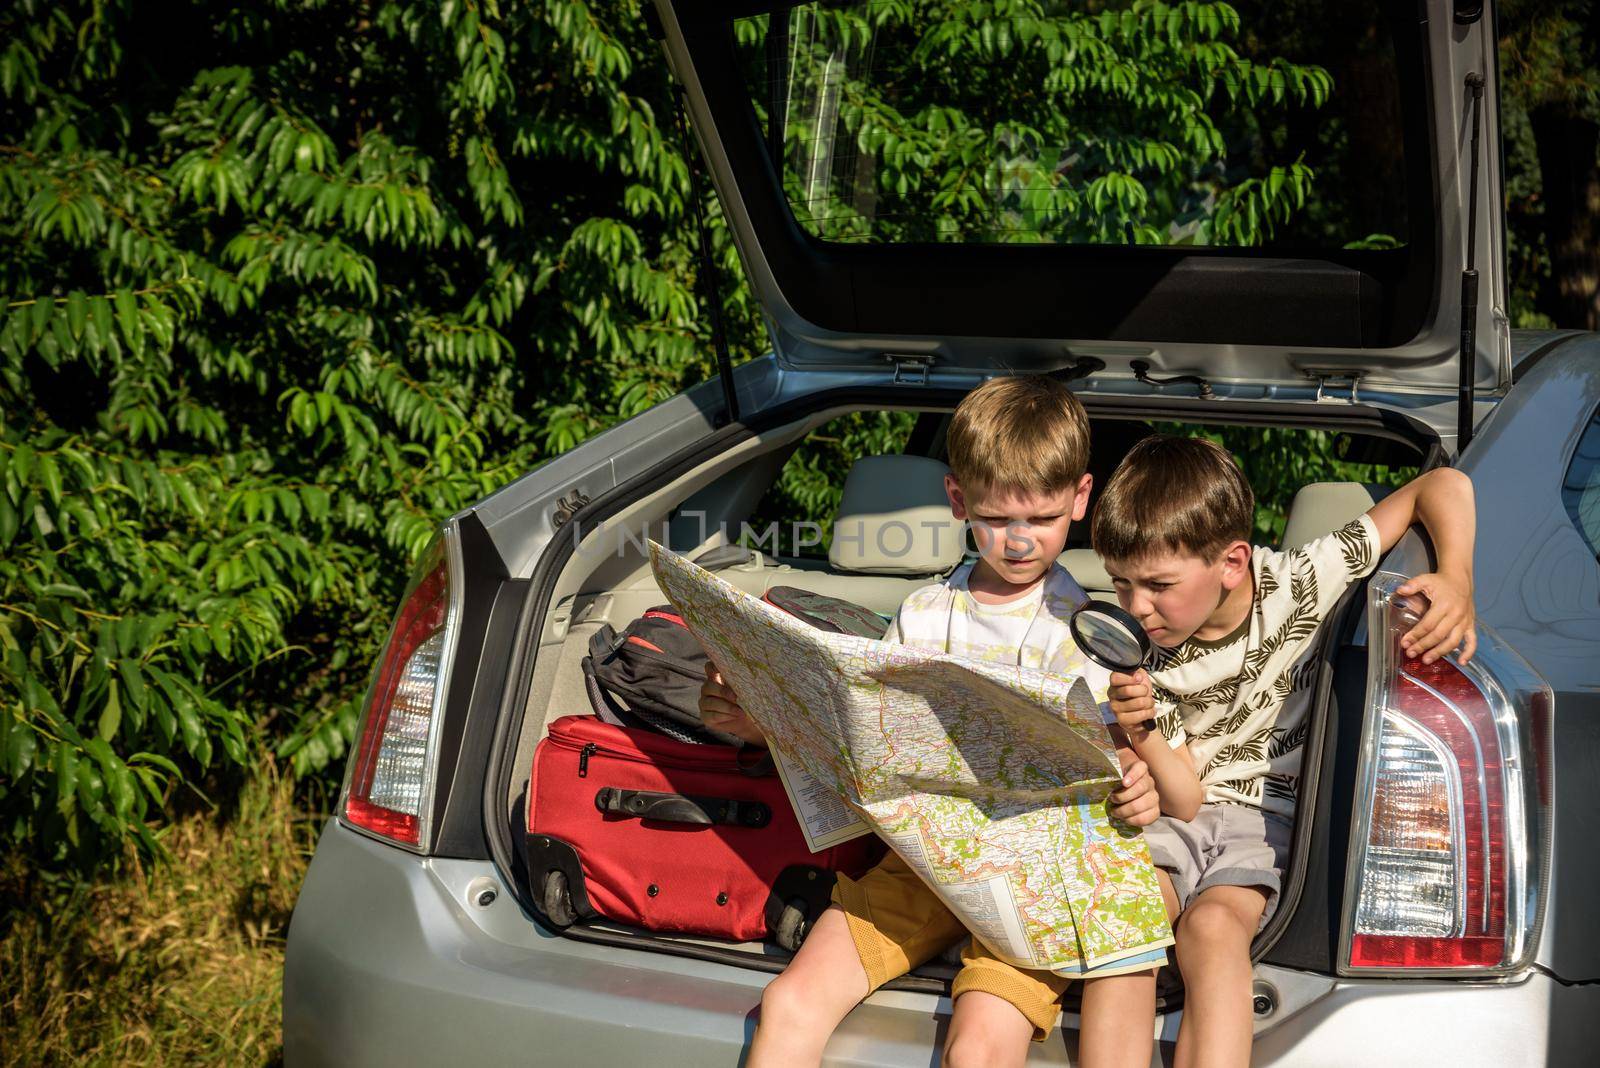 Two cute boys sitting in a car trunk before going on vacations with their parents. Kids sitting in a car examining a map. Summer break at school. Family travel by car.